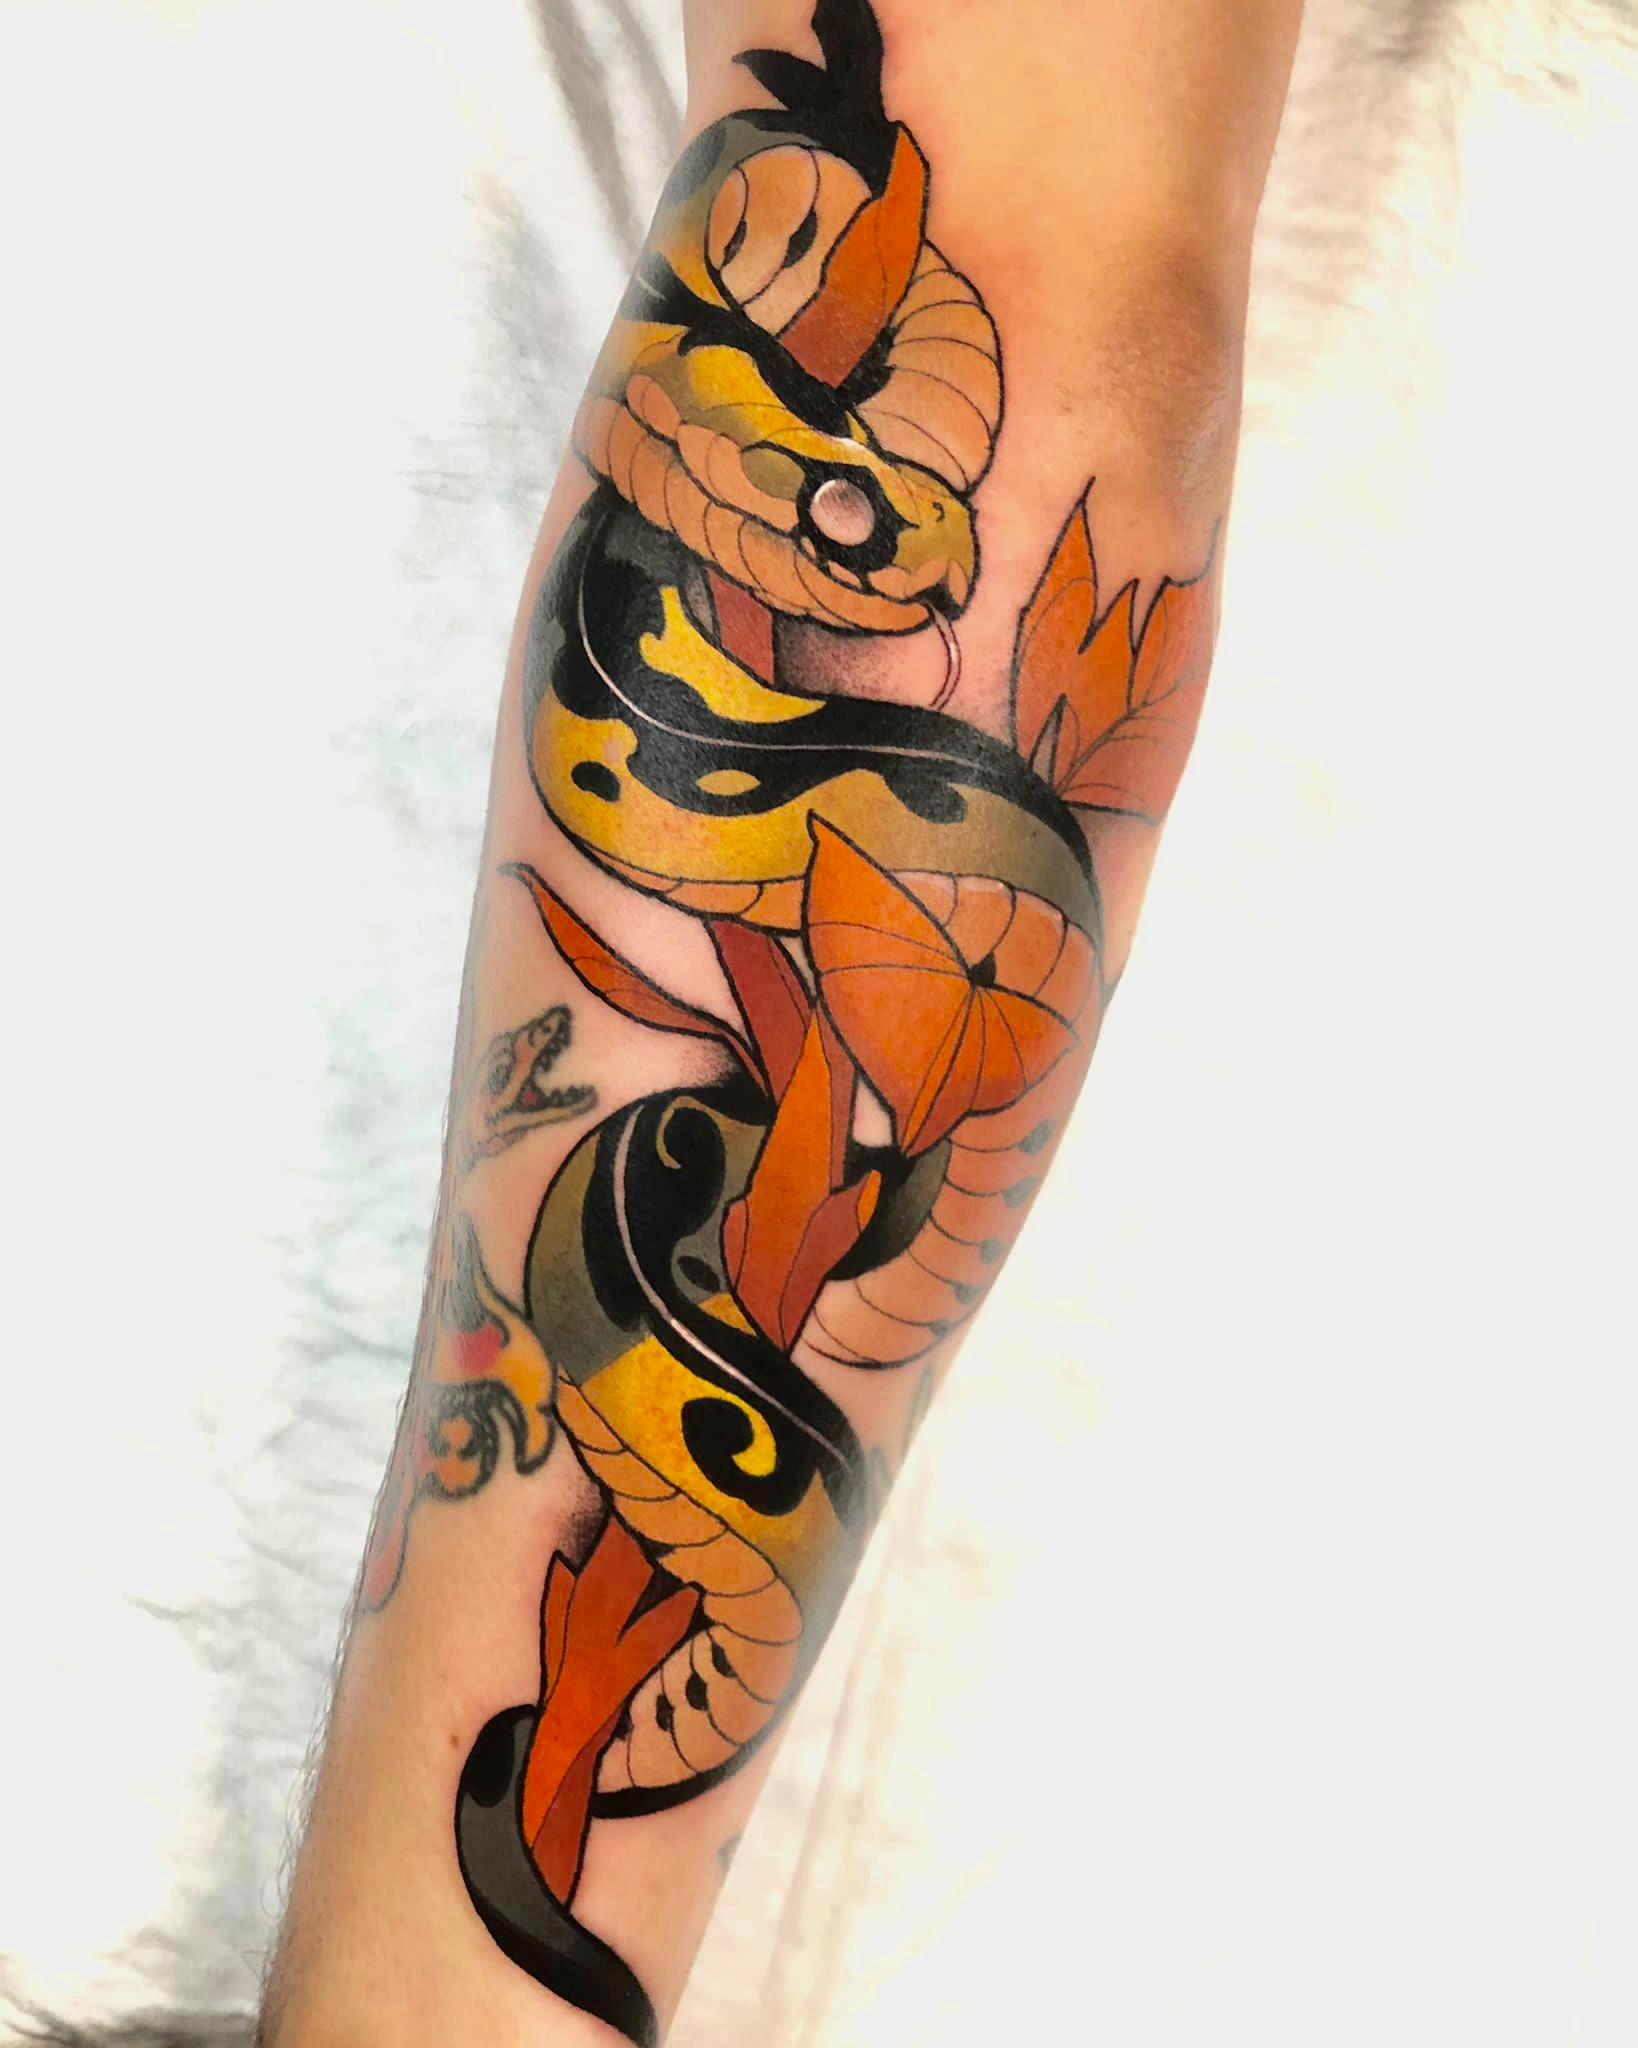 Electric  eel by joeycoxtattooer at blackpalmtattoo eeltattoo  nauticaltattoo electriceel  Instagram